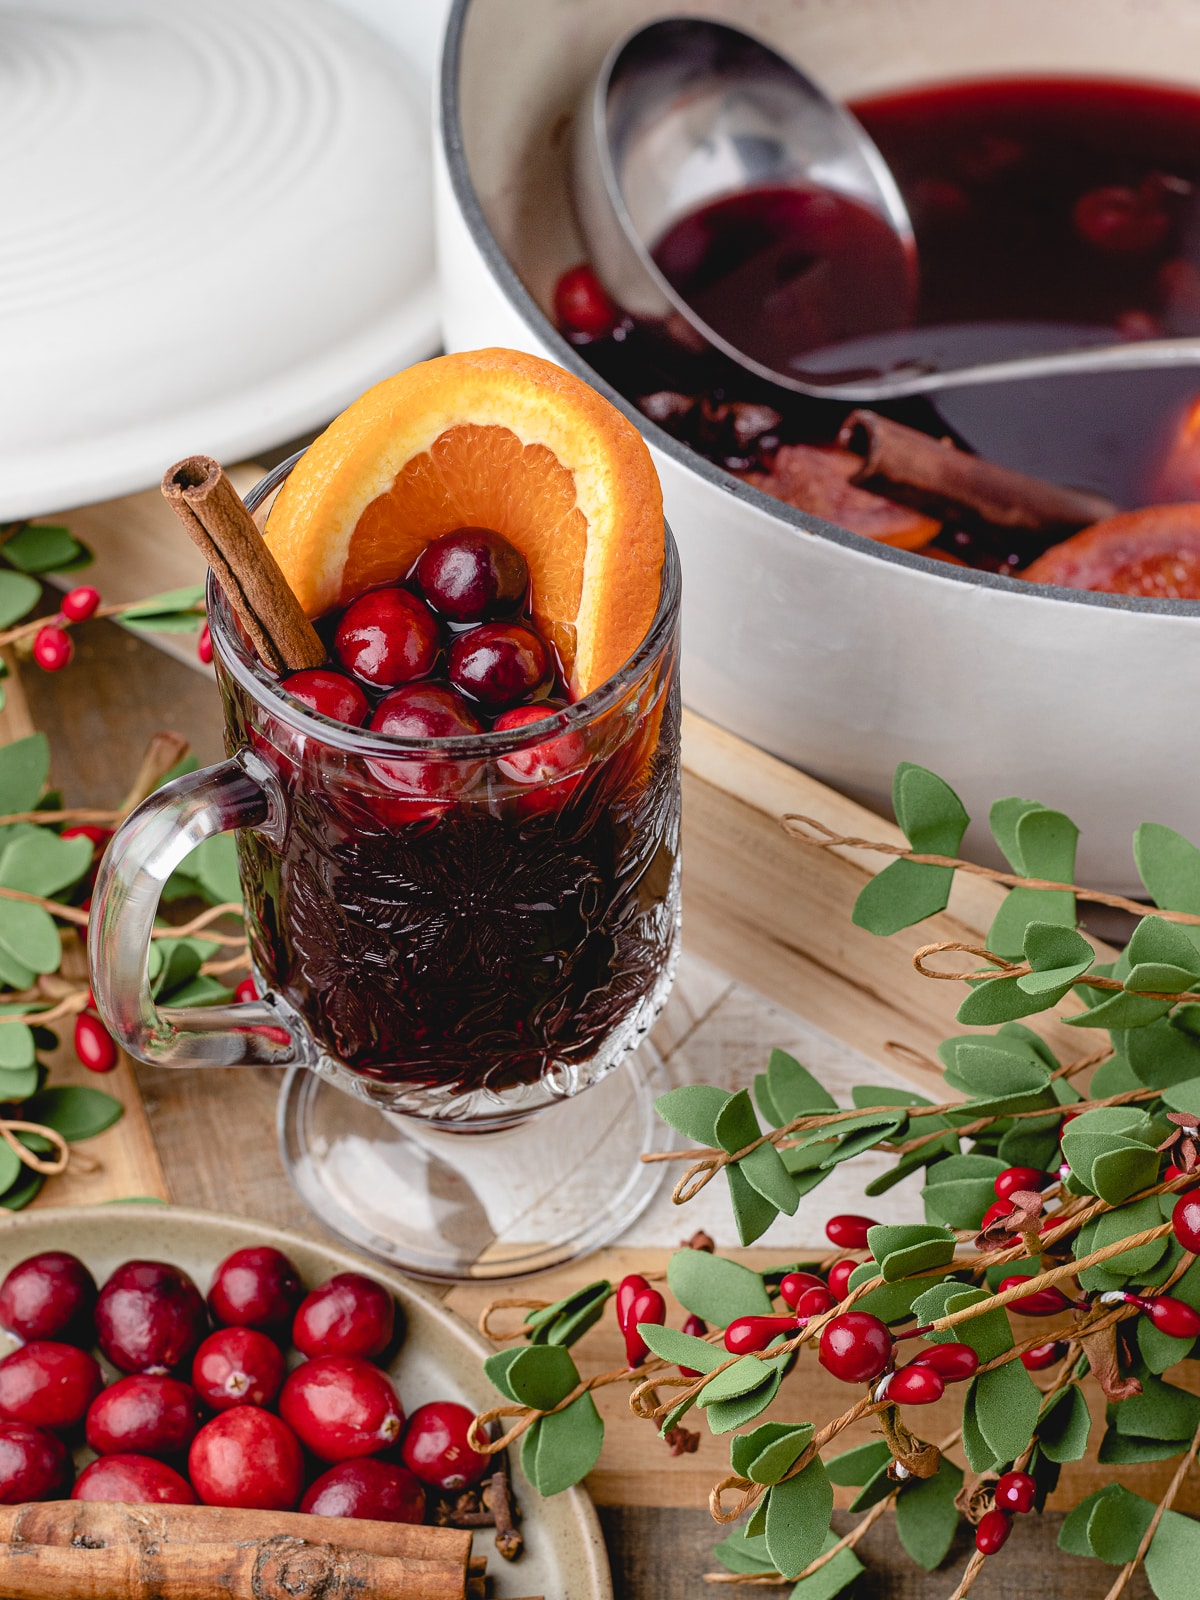 mulled wine in a glass and Dutch oven with more mulled wine and a metal ladle for serving.